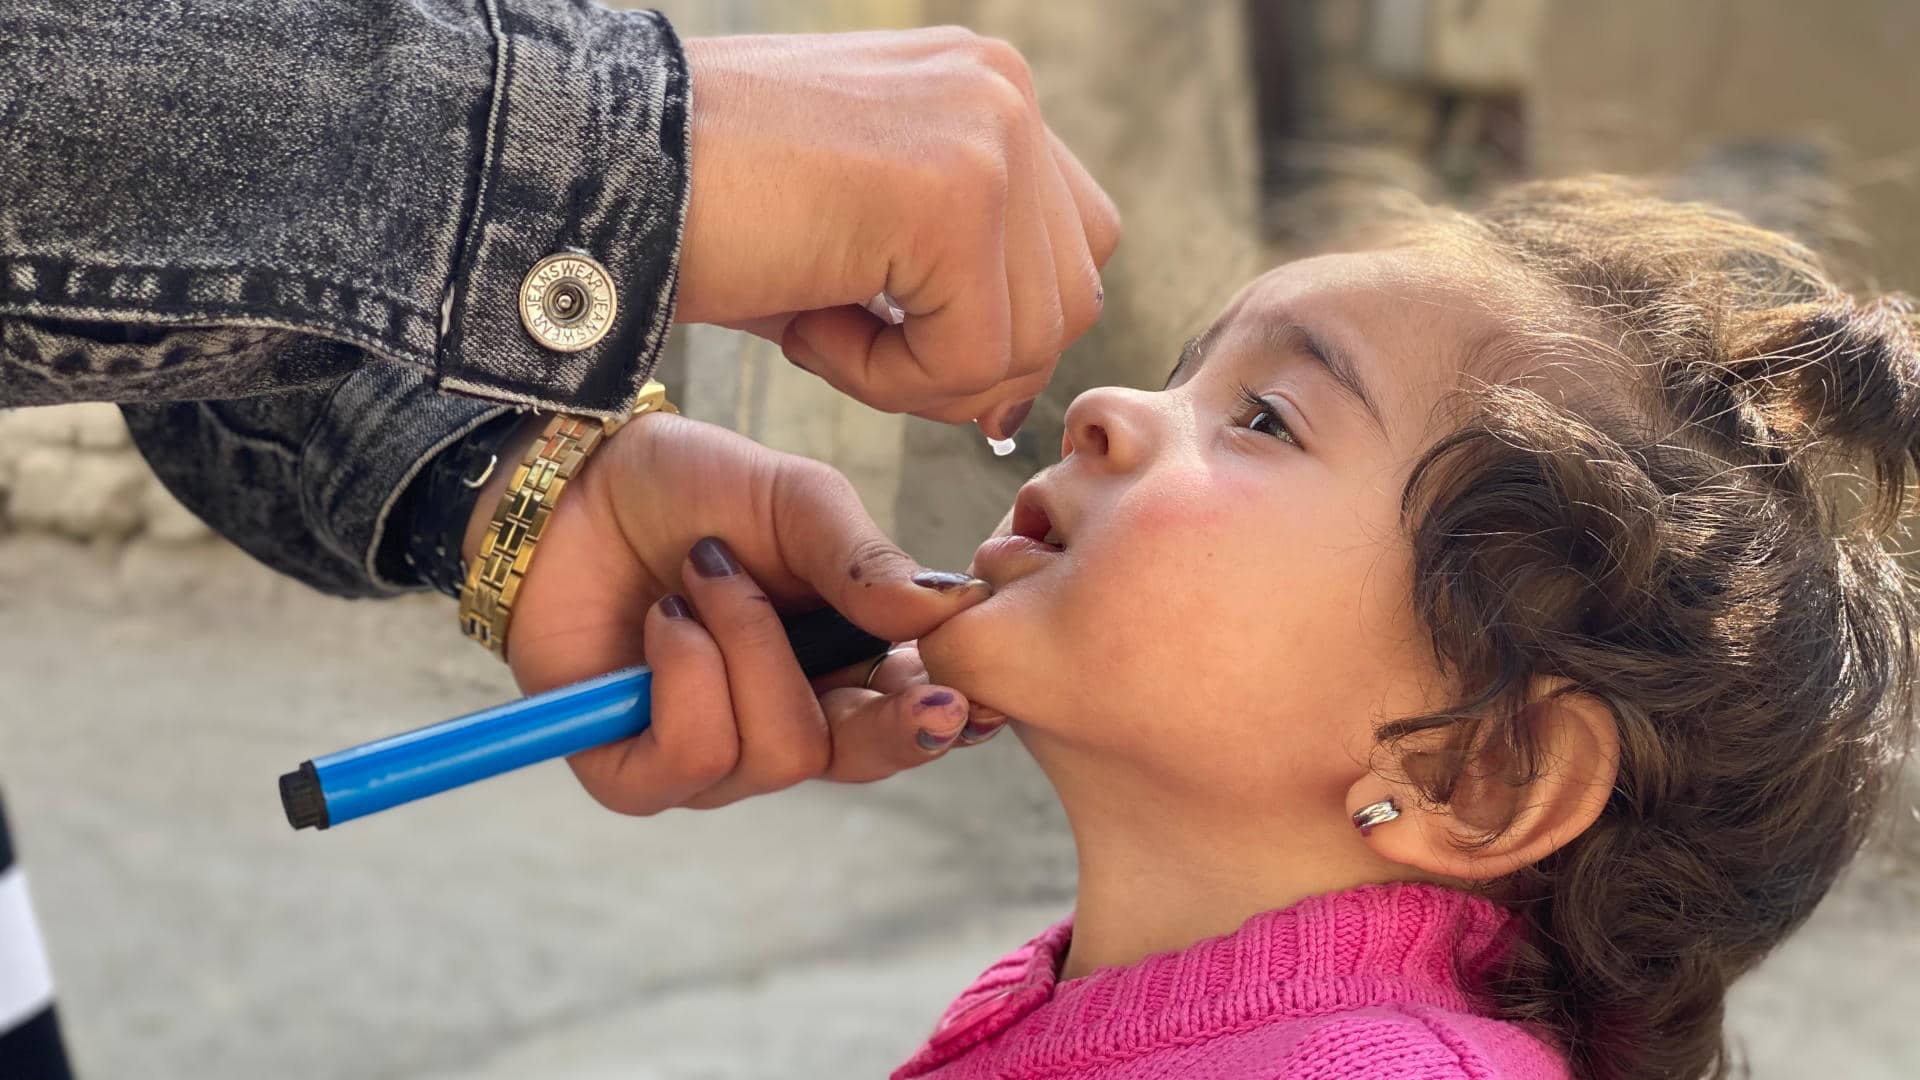 In February, the Covid-19 pandemic halted polio immunization campaigns across Afghanistan and Pakistan, fueling a new resurgence of polio in children. Here, a young girl is given the polio vaccine in the Kabul Province in October after campaigns were resumed.